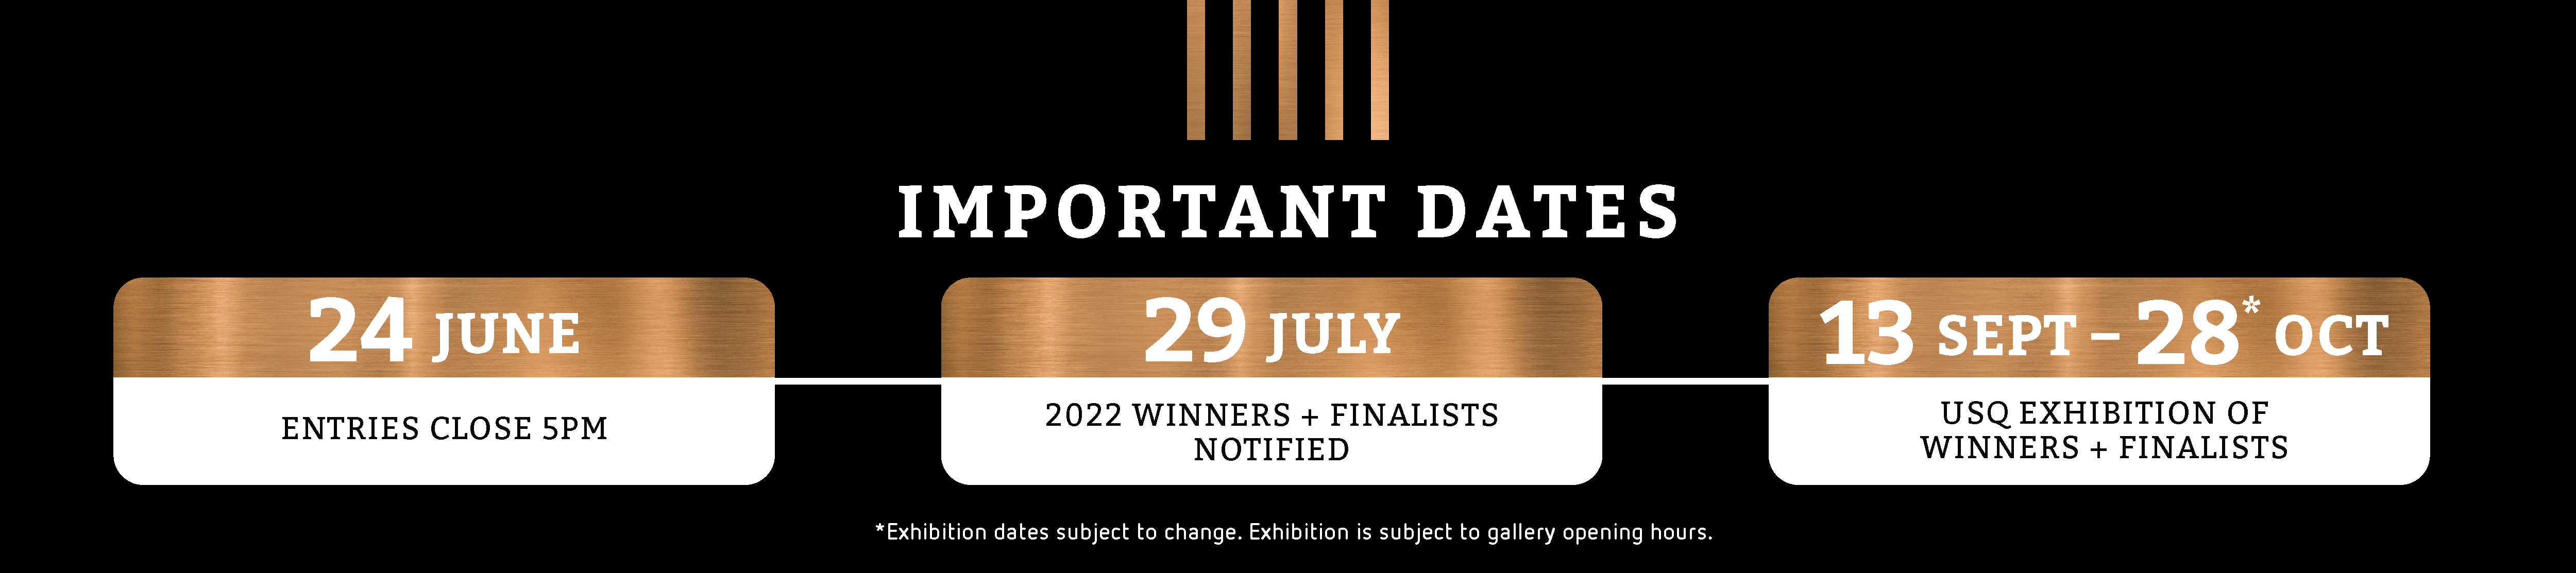 https://www.heritage.com.au/-/media/m/images/sponsorship/photographic-awards/2022-awards/important_dates_2022_entries_open.png?cx=0.5&cy=0.5&cw=5000&ch=1113&hash=9884F42A42BC49AFBD972BC6BE3ED4F1BECEEB8E